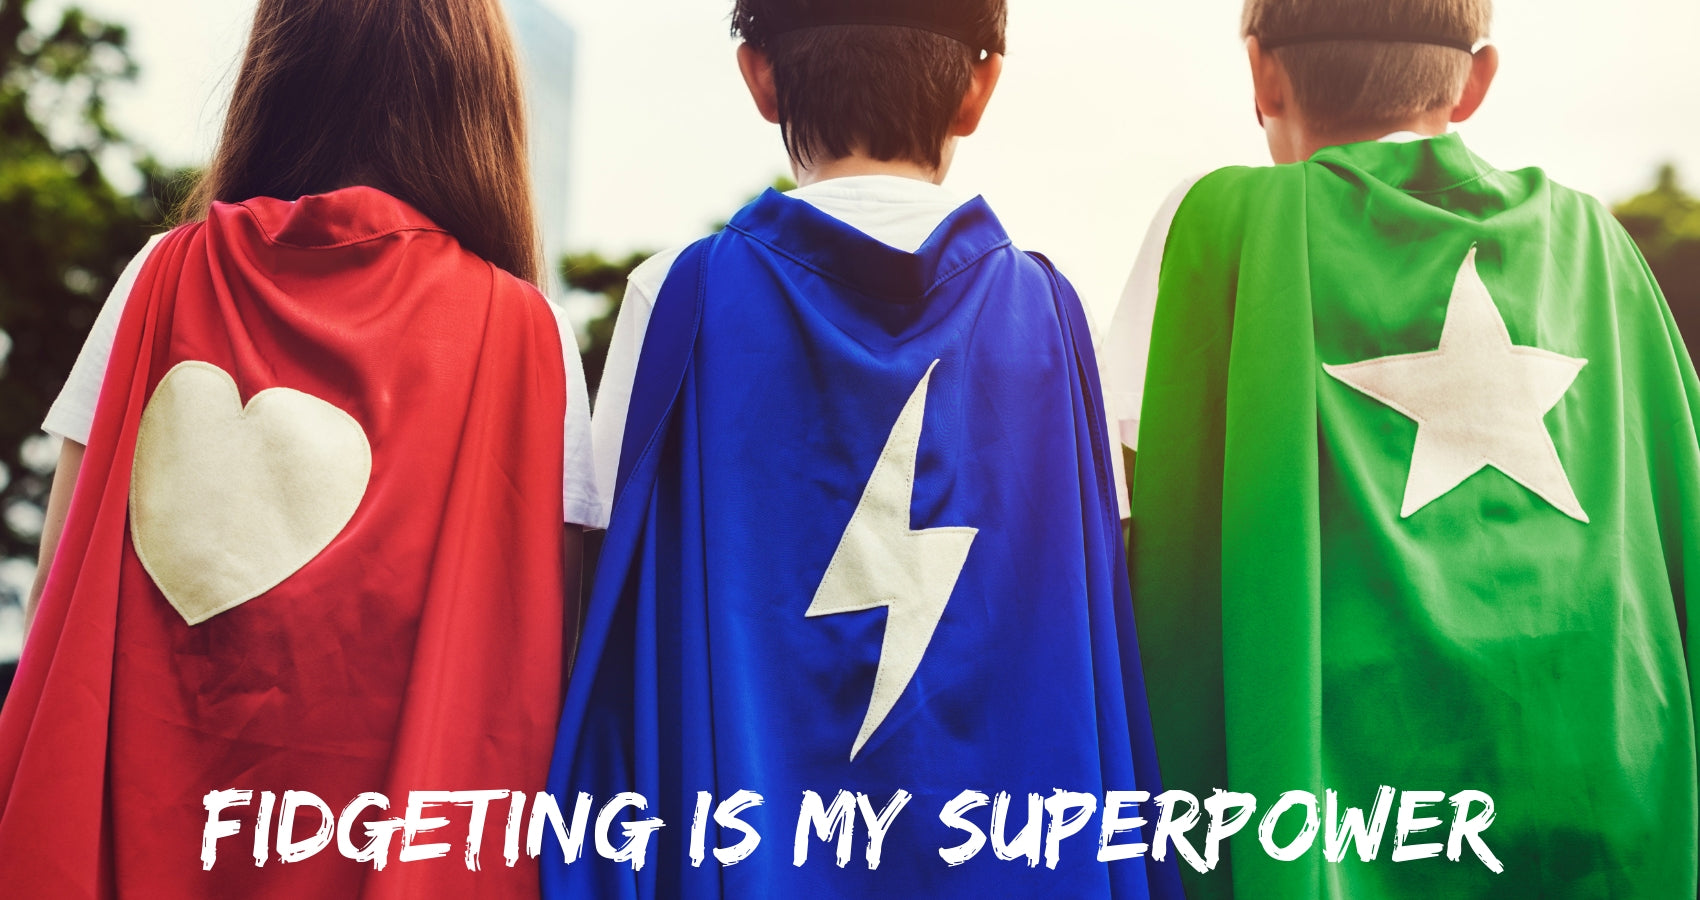 three people with superhero capes in red, blue, and green. Text reads "Fidgeting is my superpower"